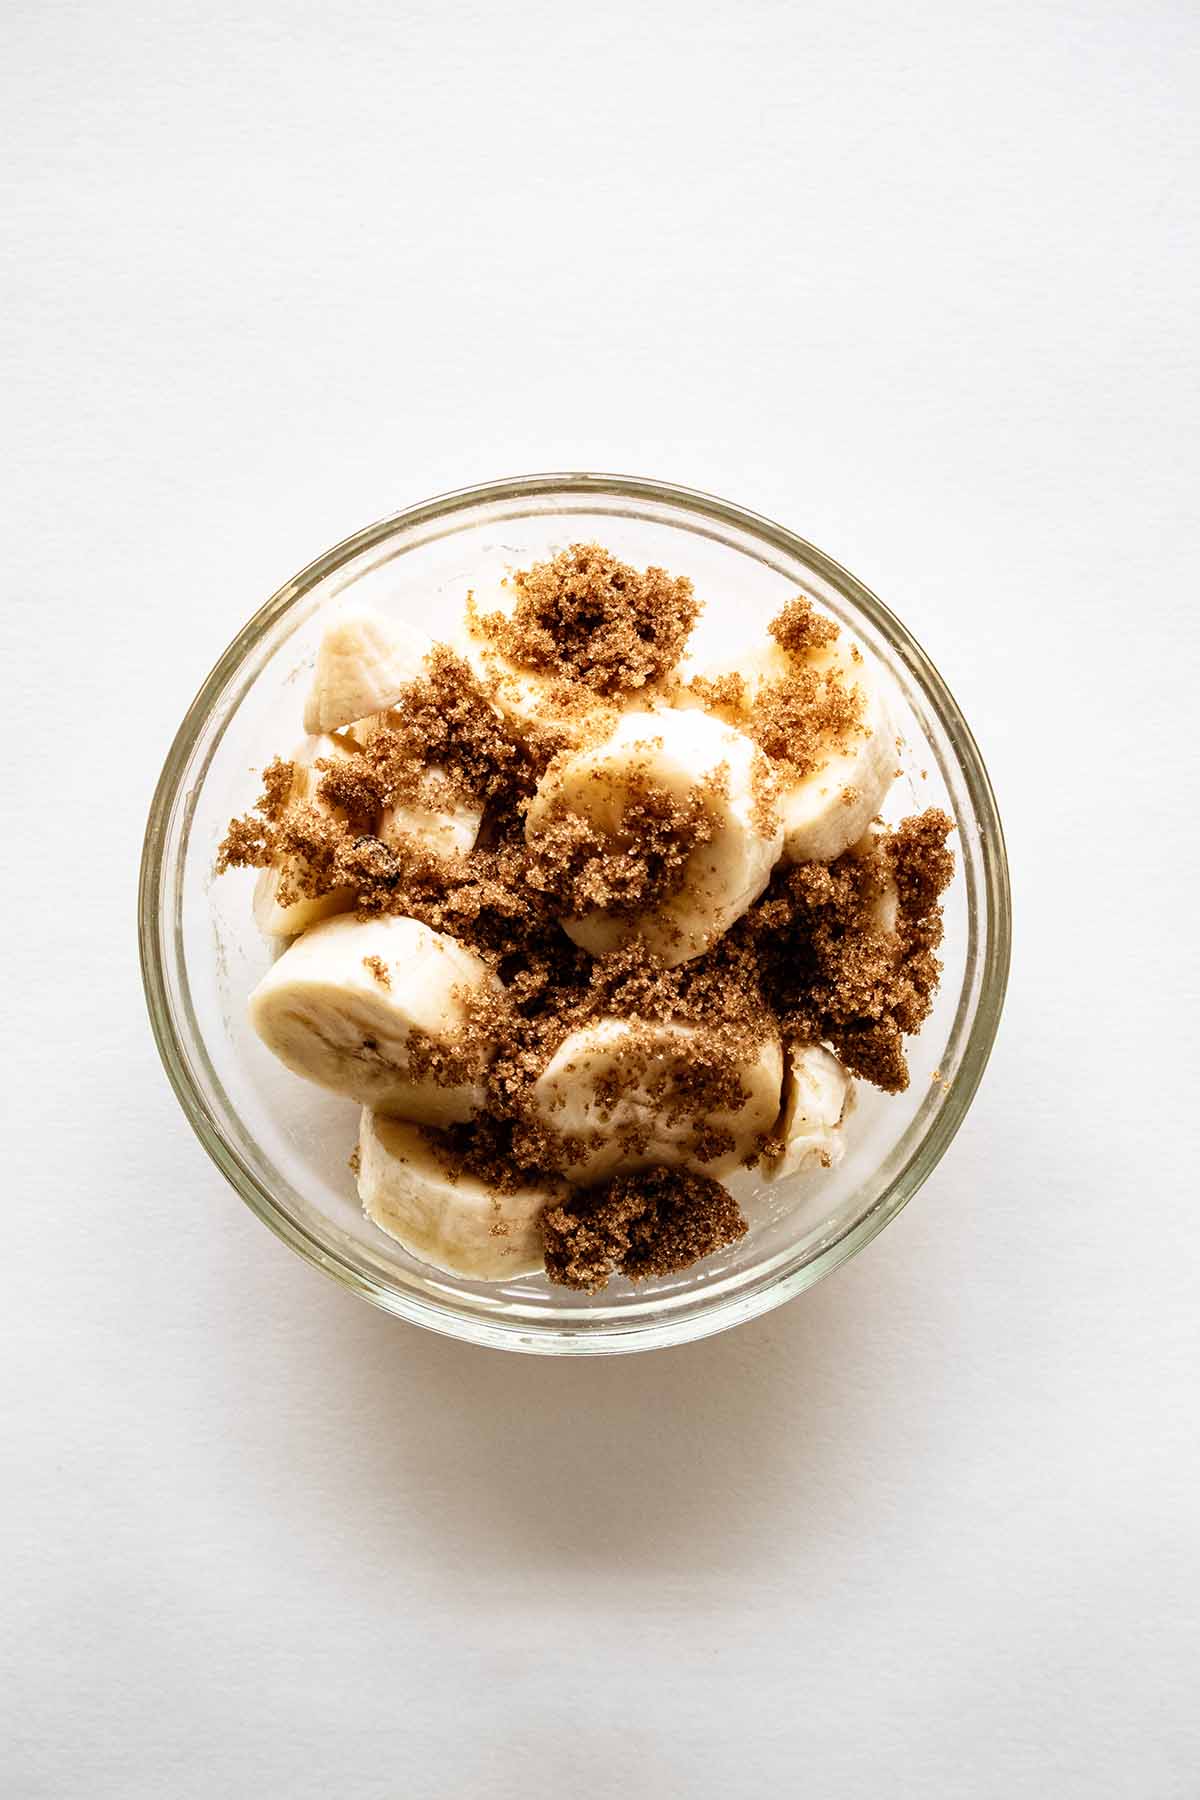 Overhead view of sliced bananas and brown sugar in a glass bowl